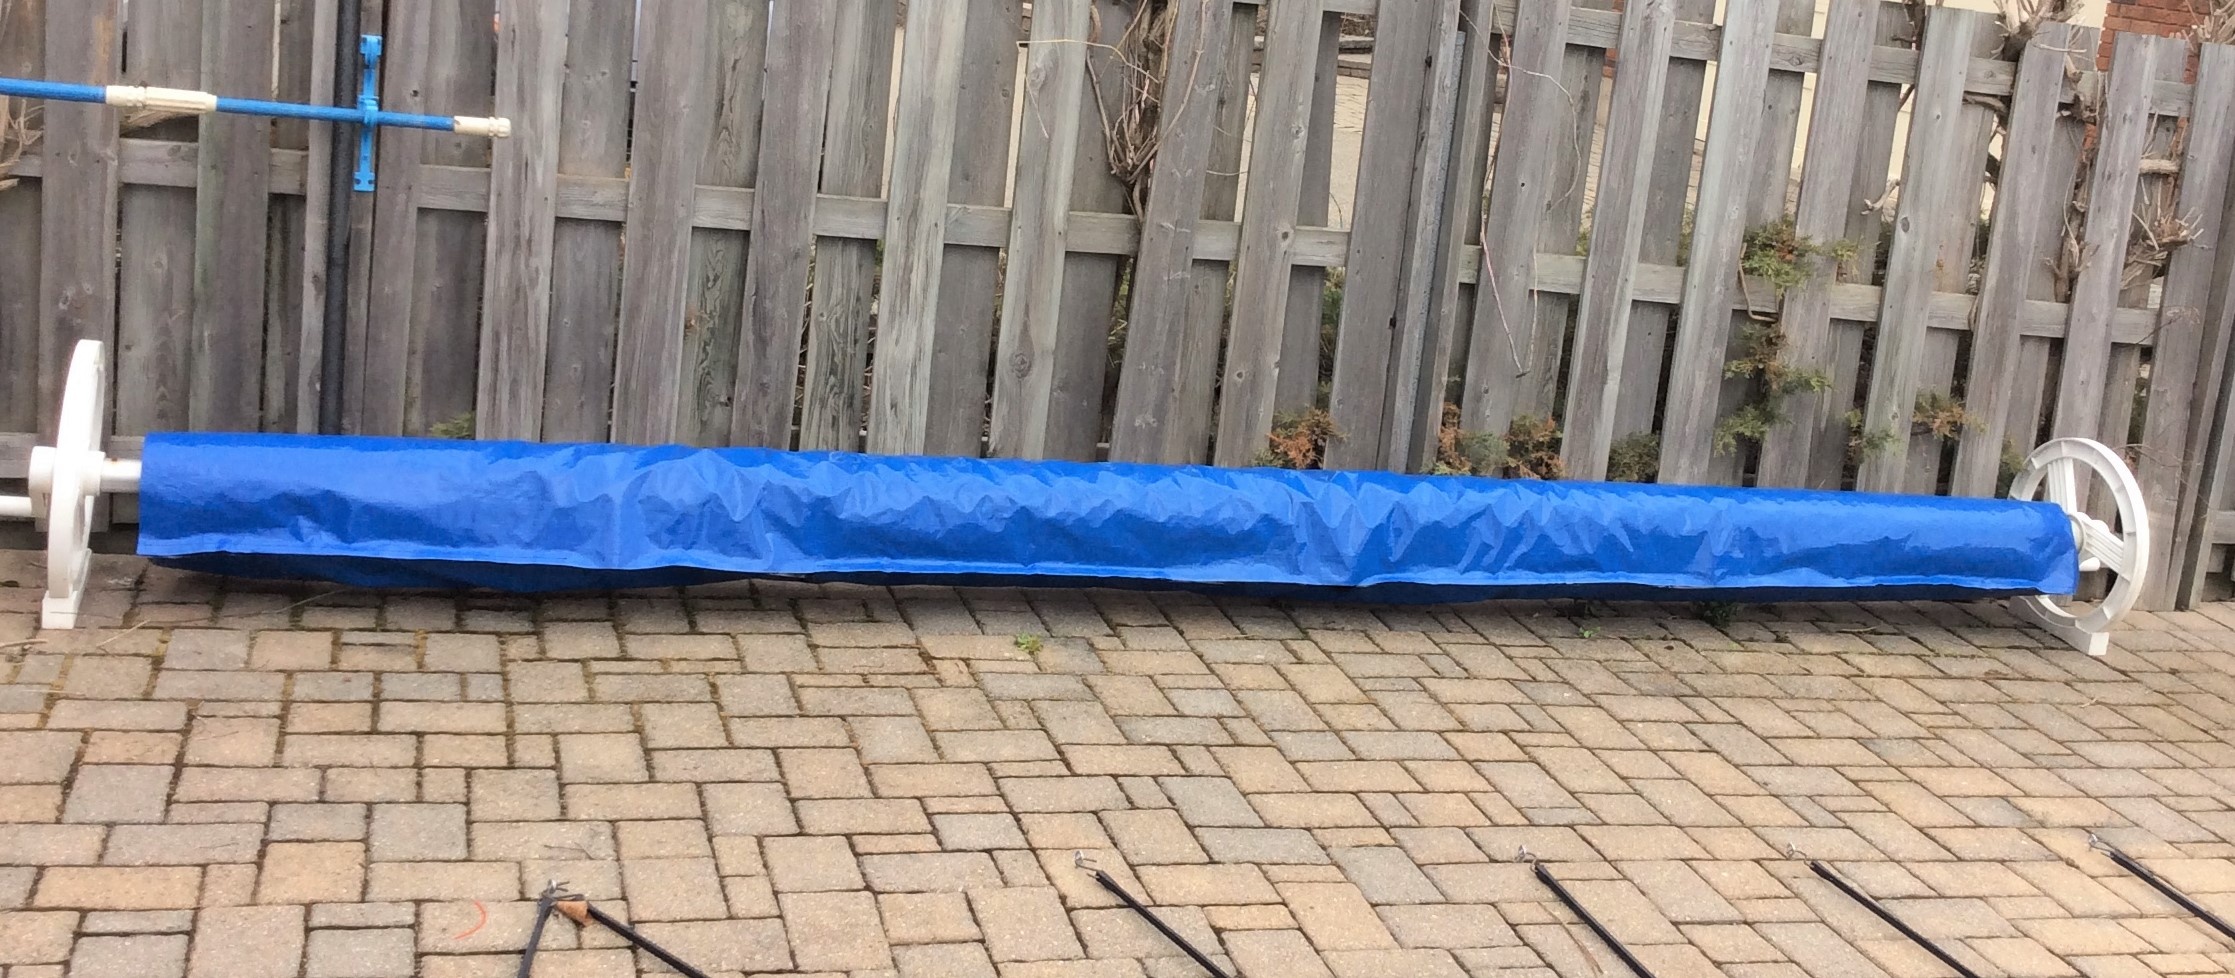 Solar Blanket Cover Protector